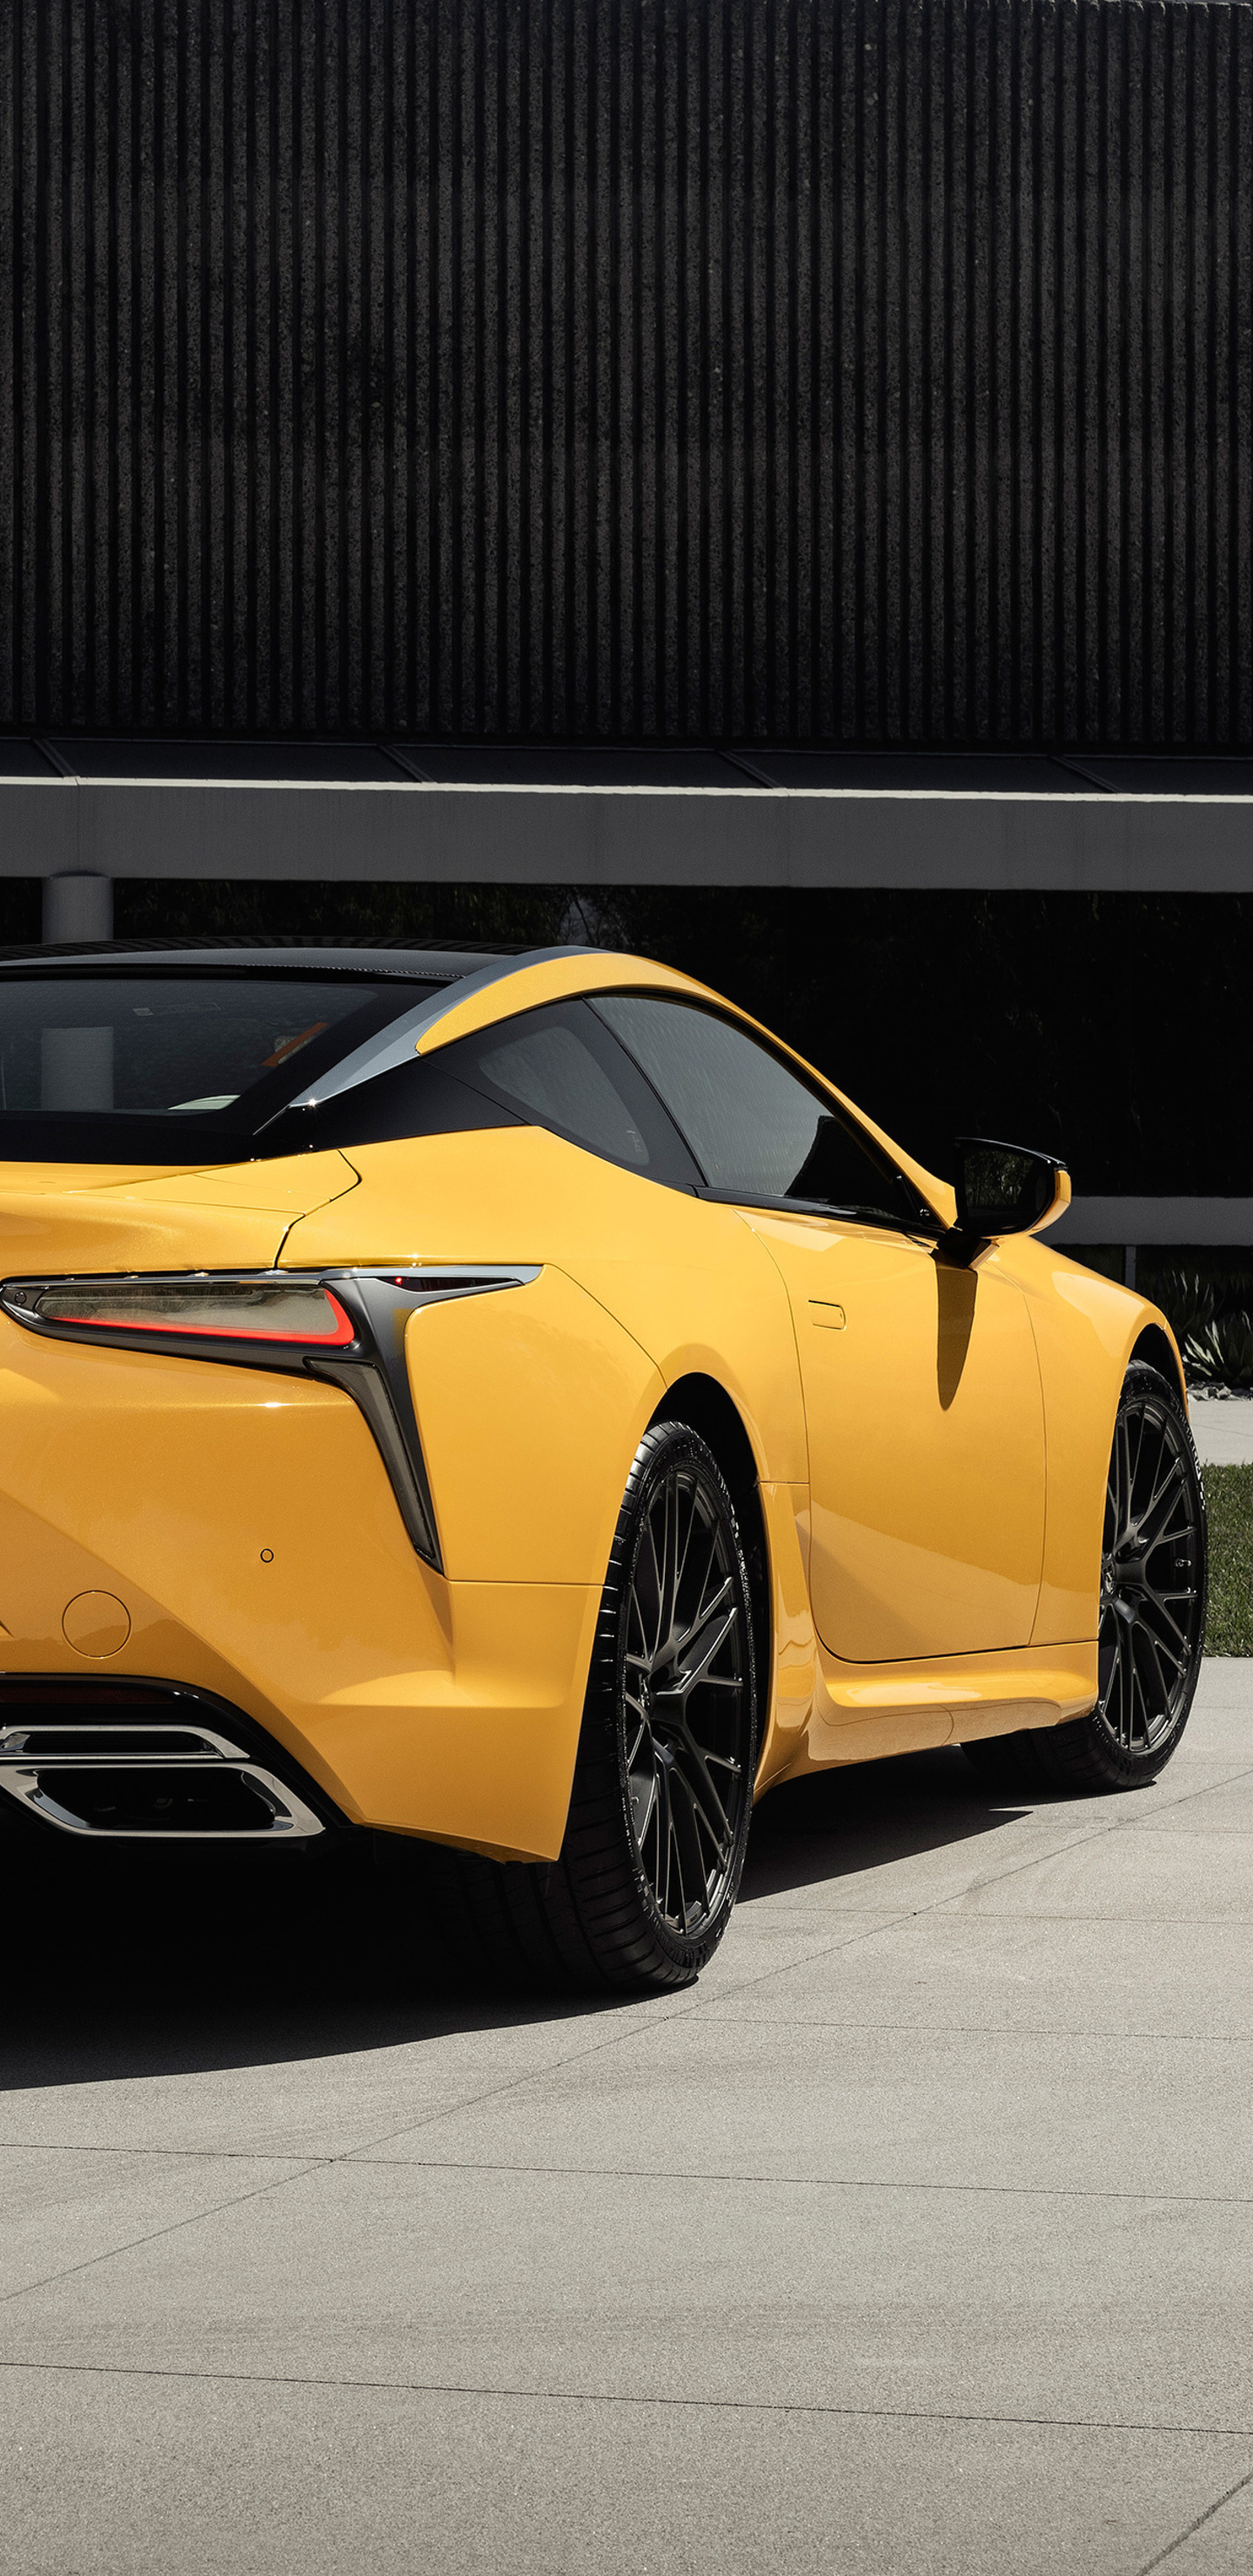 1440x2960 2019 Lexus Lc 500 Inspiration Concept Rear Samsung Galaxy Note 9 8 S9 S8 S8 Qhd Hd 4k Wallpapers Images Backgrounds Photos And Pictures